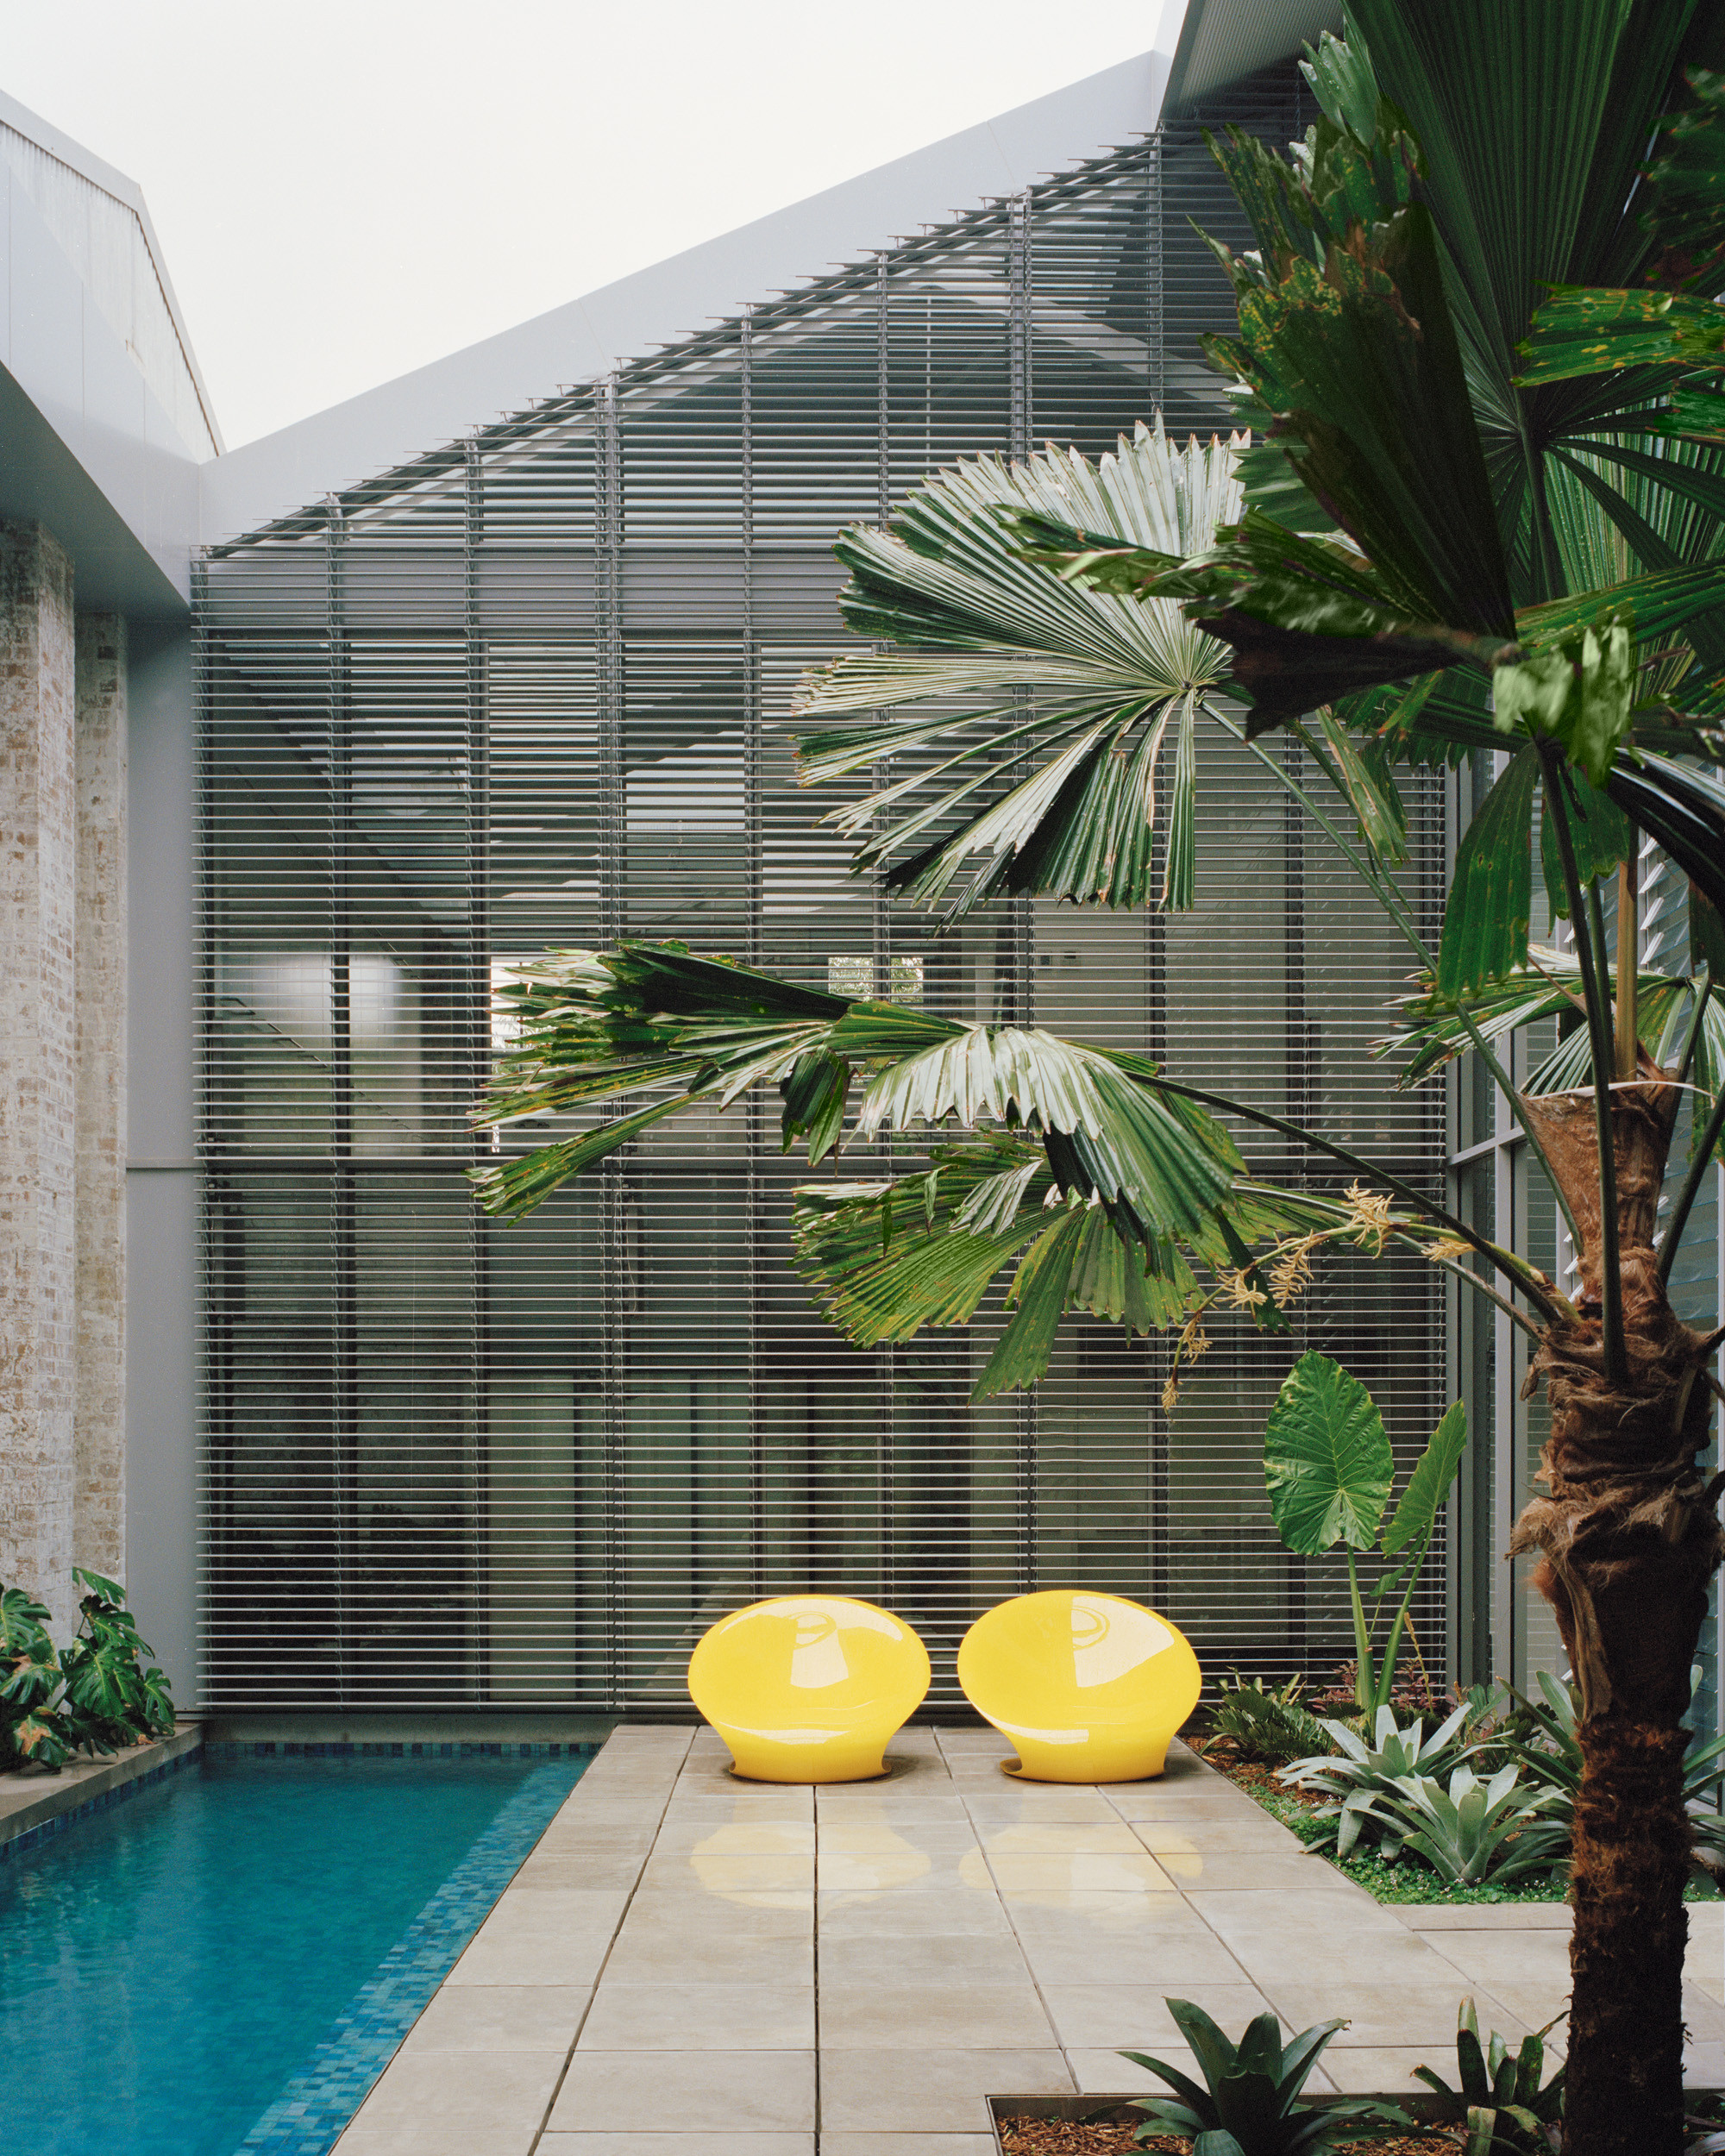 18 Stupendous Industrial Swimming Pool Designs